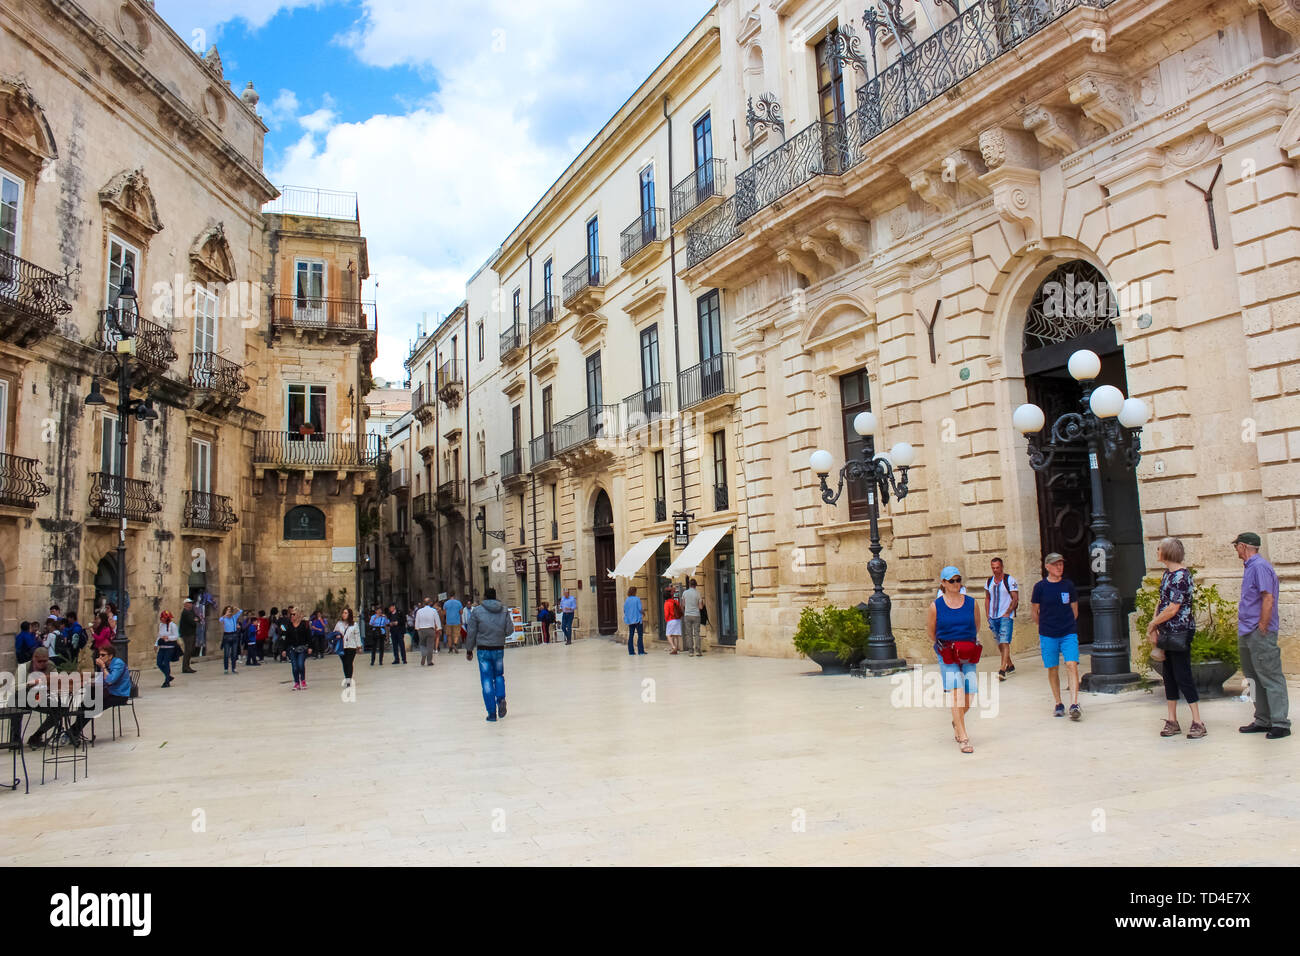 Syracuse, Sicily, Italy - Apr 10th 2019: People walking on the Piazza Duomo Square in the historical center. The center is located on the famous Ortigia Island. Popular tourist attraction. Stock Photo